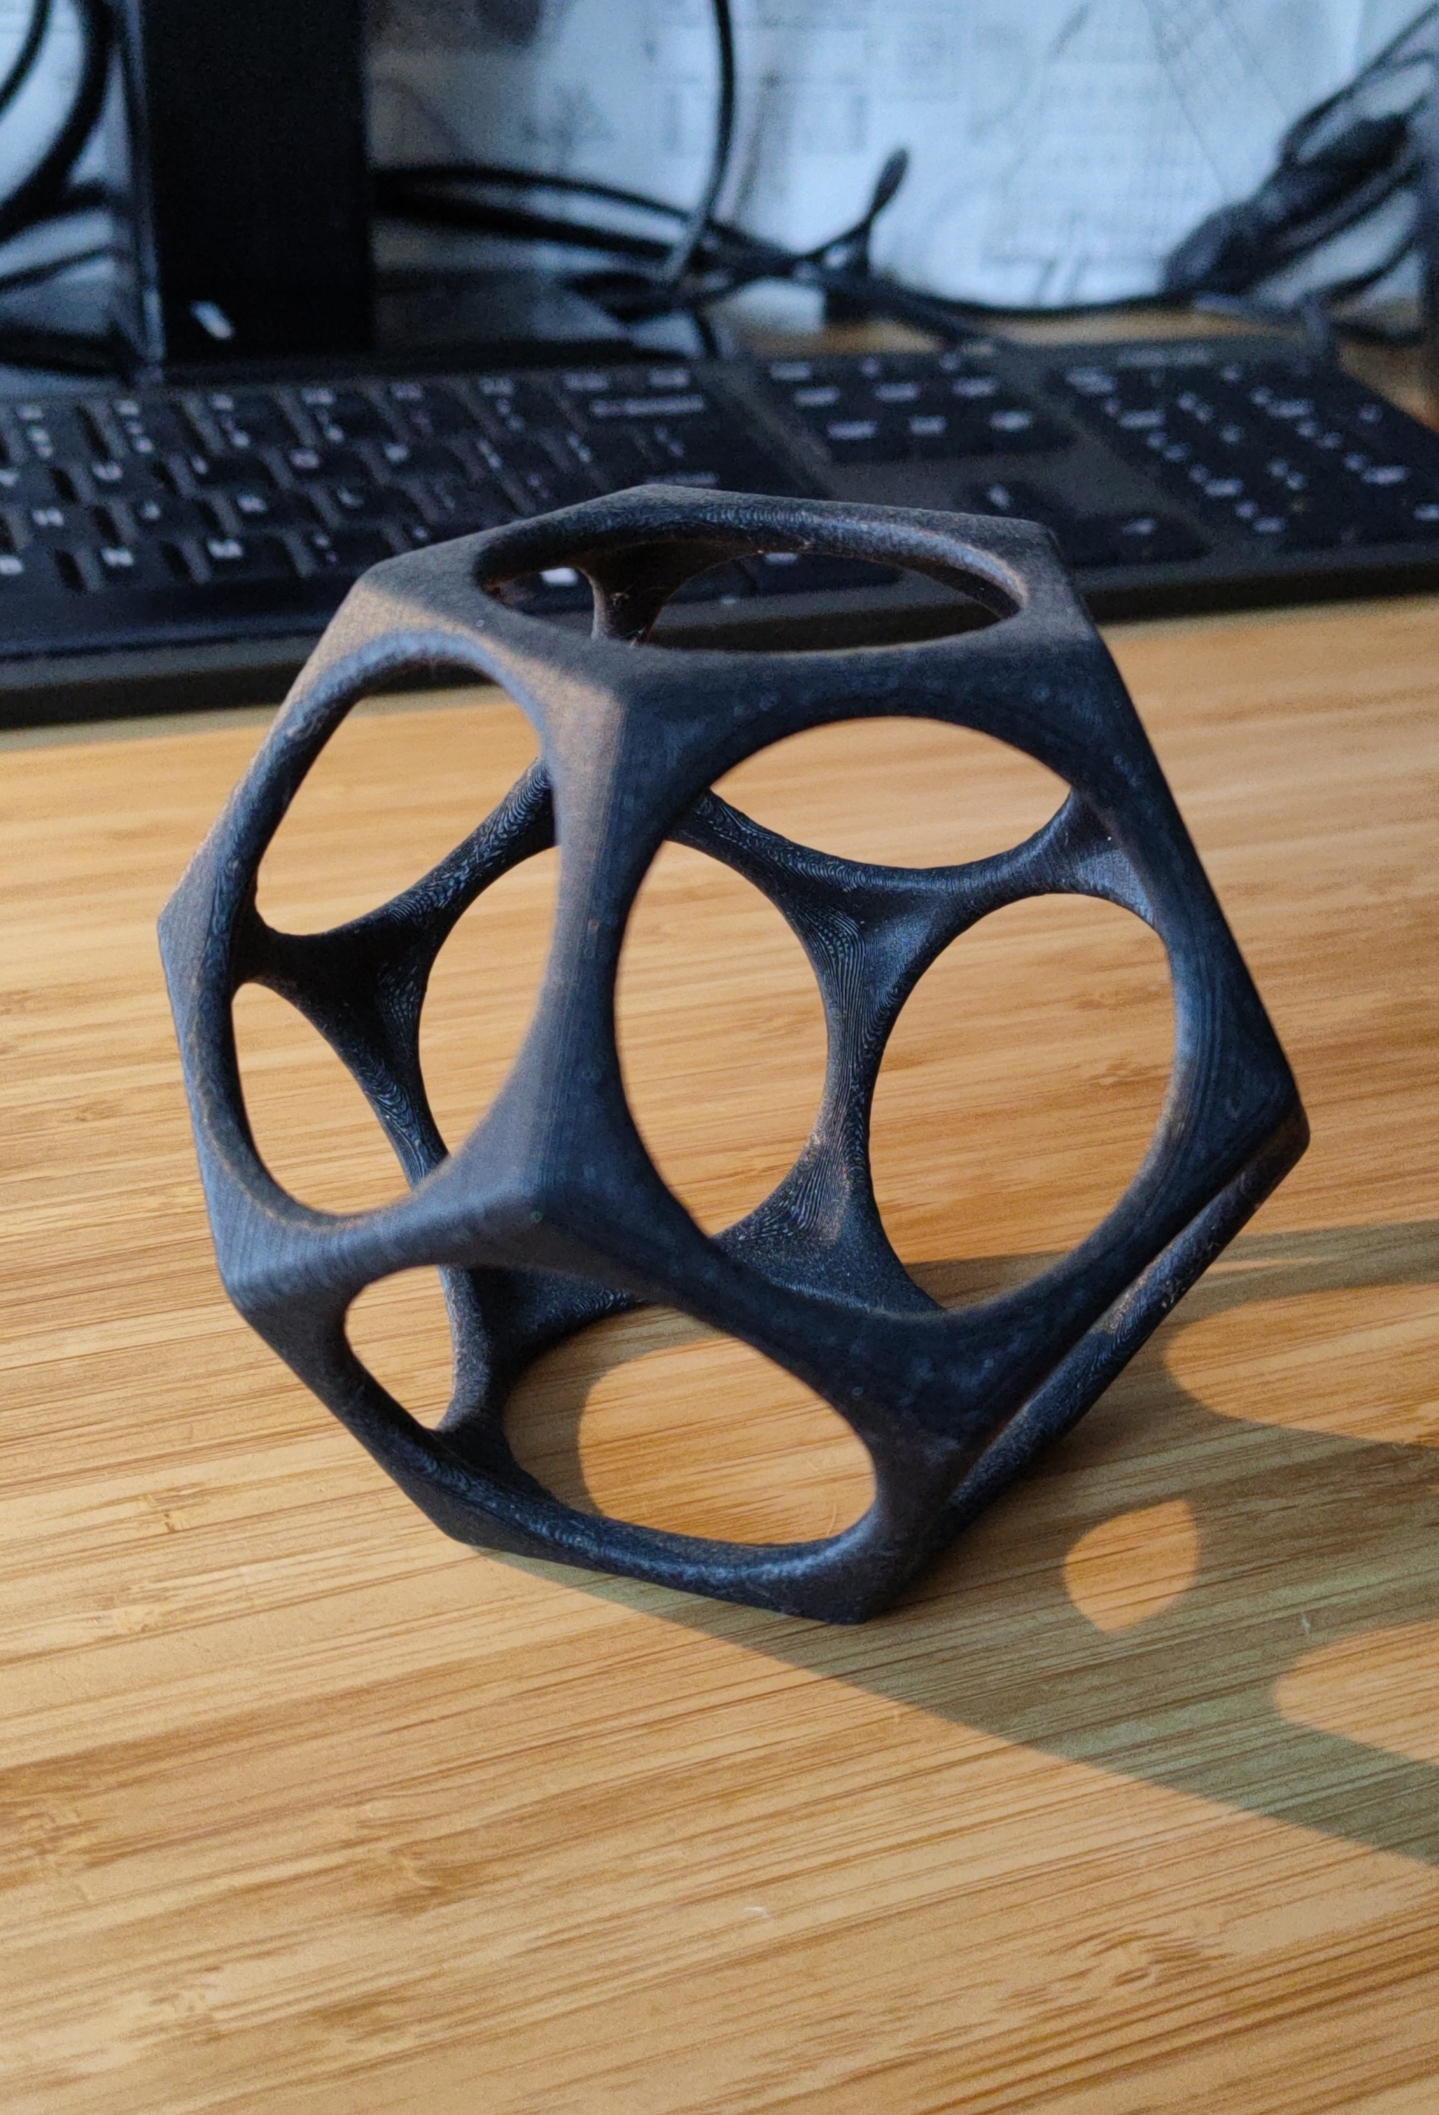 DoDecahedron - Ancient sculpture